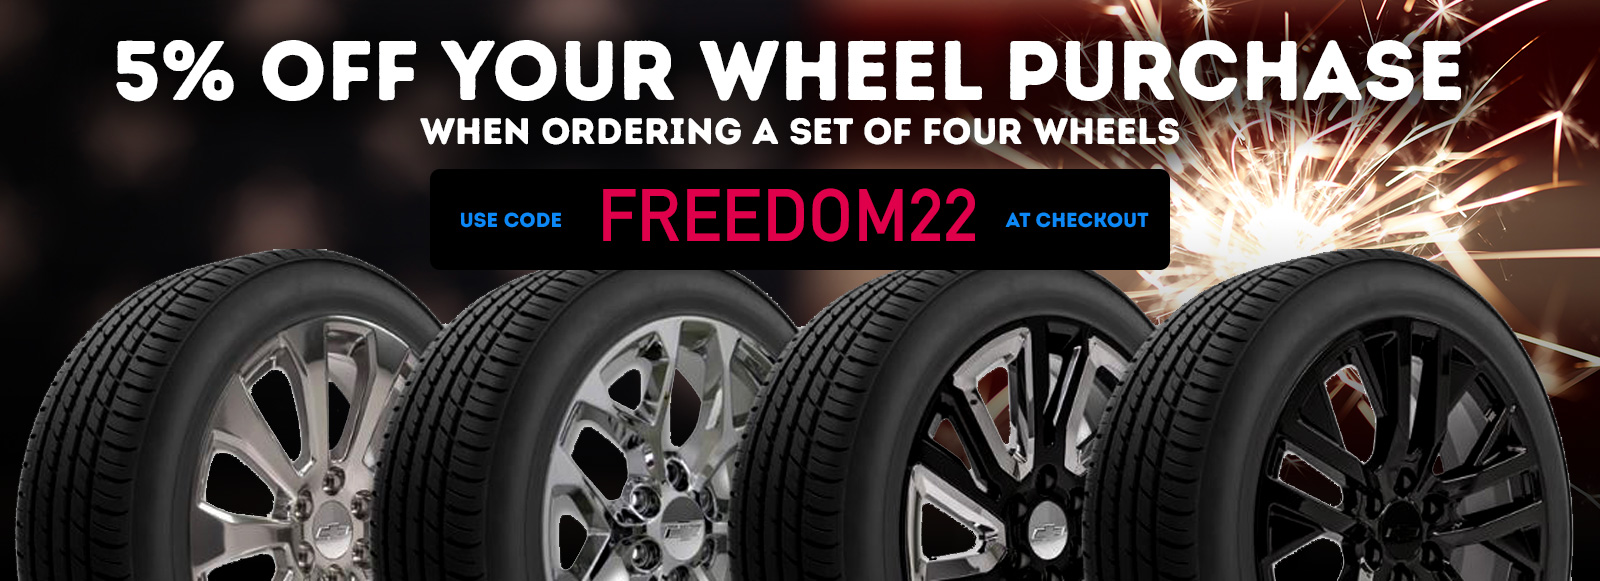 5% Off your wheel purchase when ordering a set of four wheels - valid from July 1 through July 5